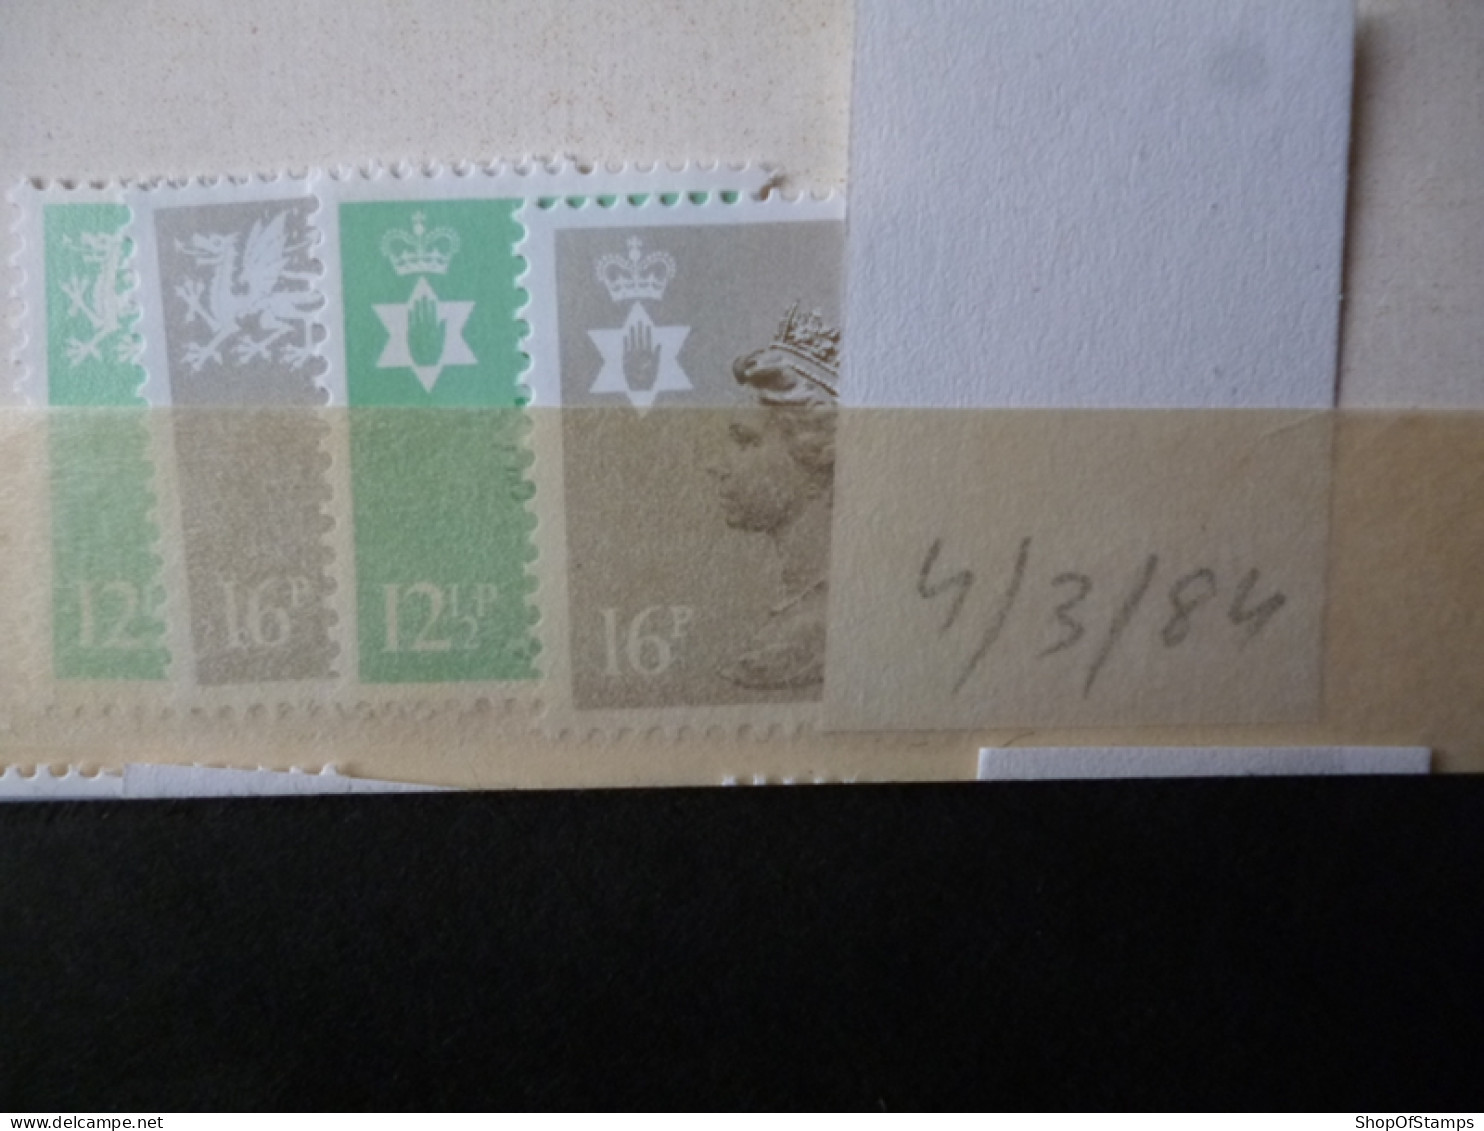 GREAT BRITAIN SG X 1984 28.2.84  MINT DEFI ISSUE FROM GPO IN ENVELOPE - Machines à Affranchir (EMA)